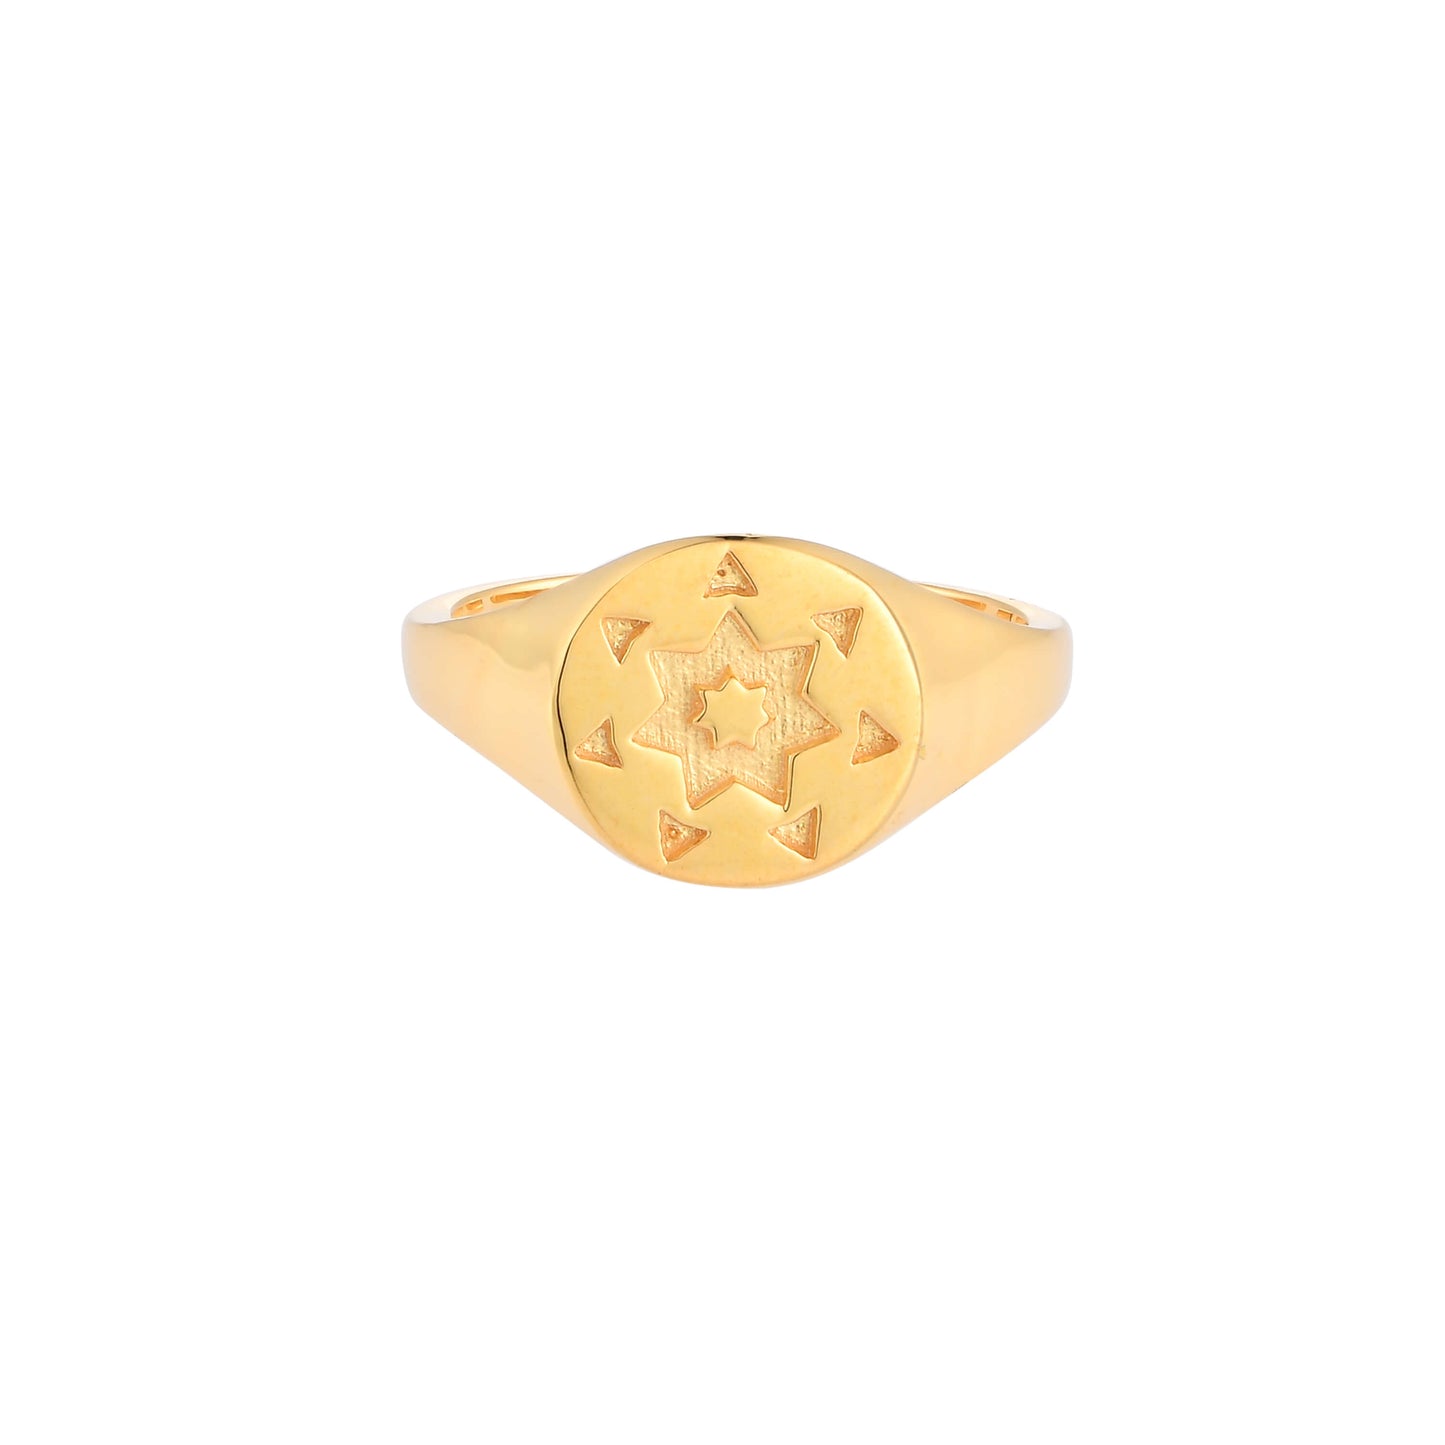 Silver Rings 18k Gold-plated Nour Star Ring Image 1